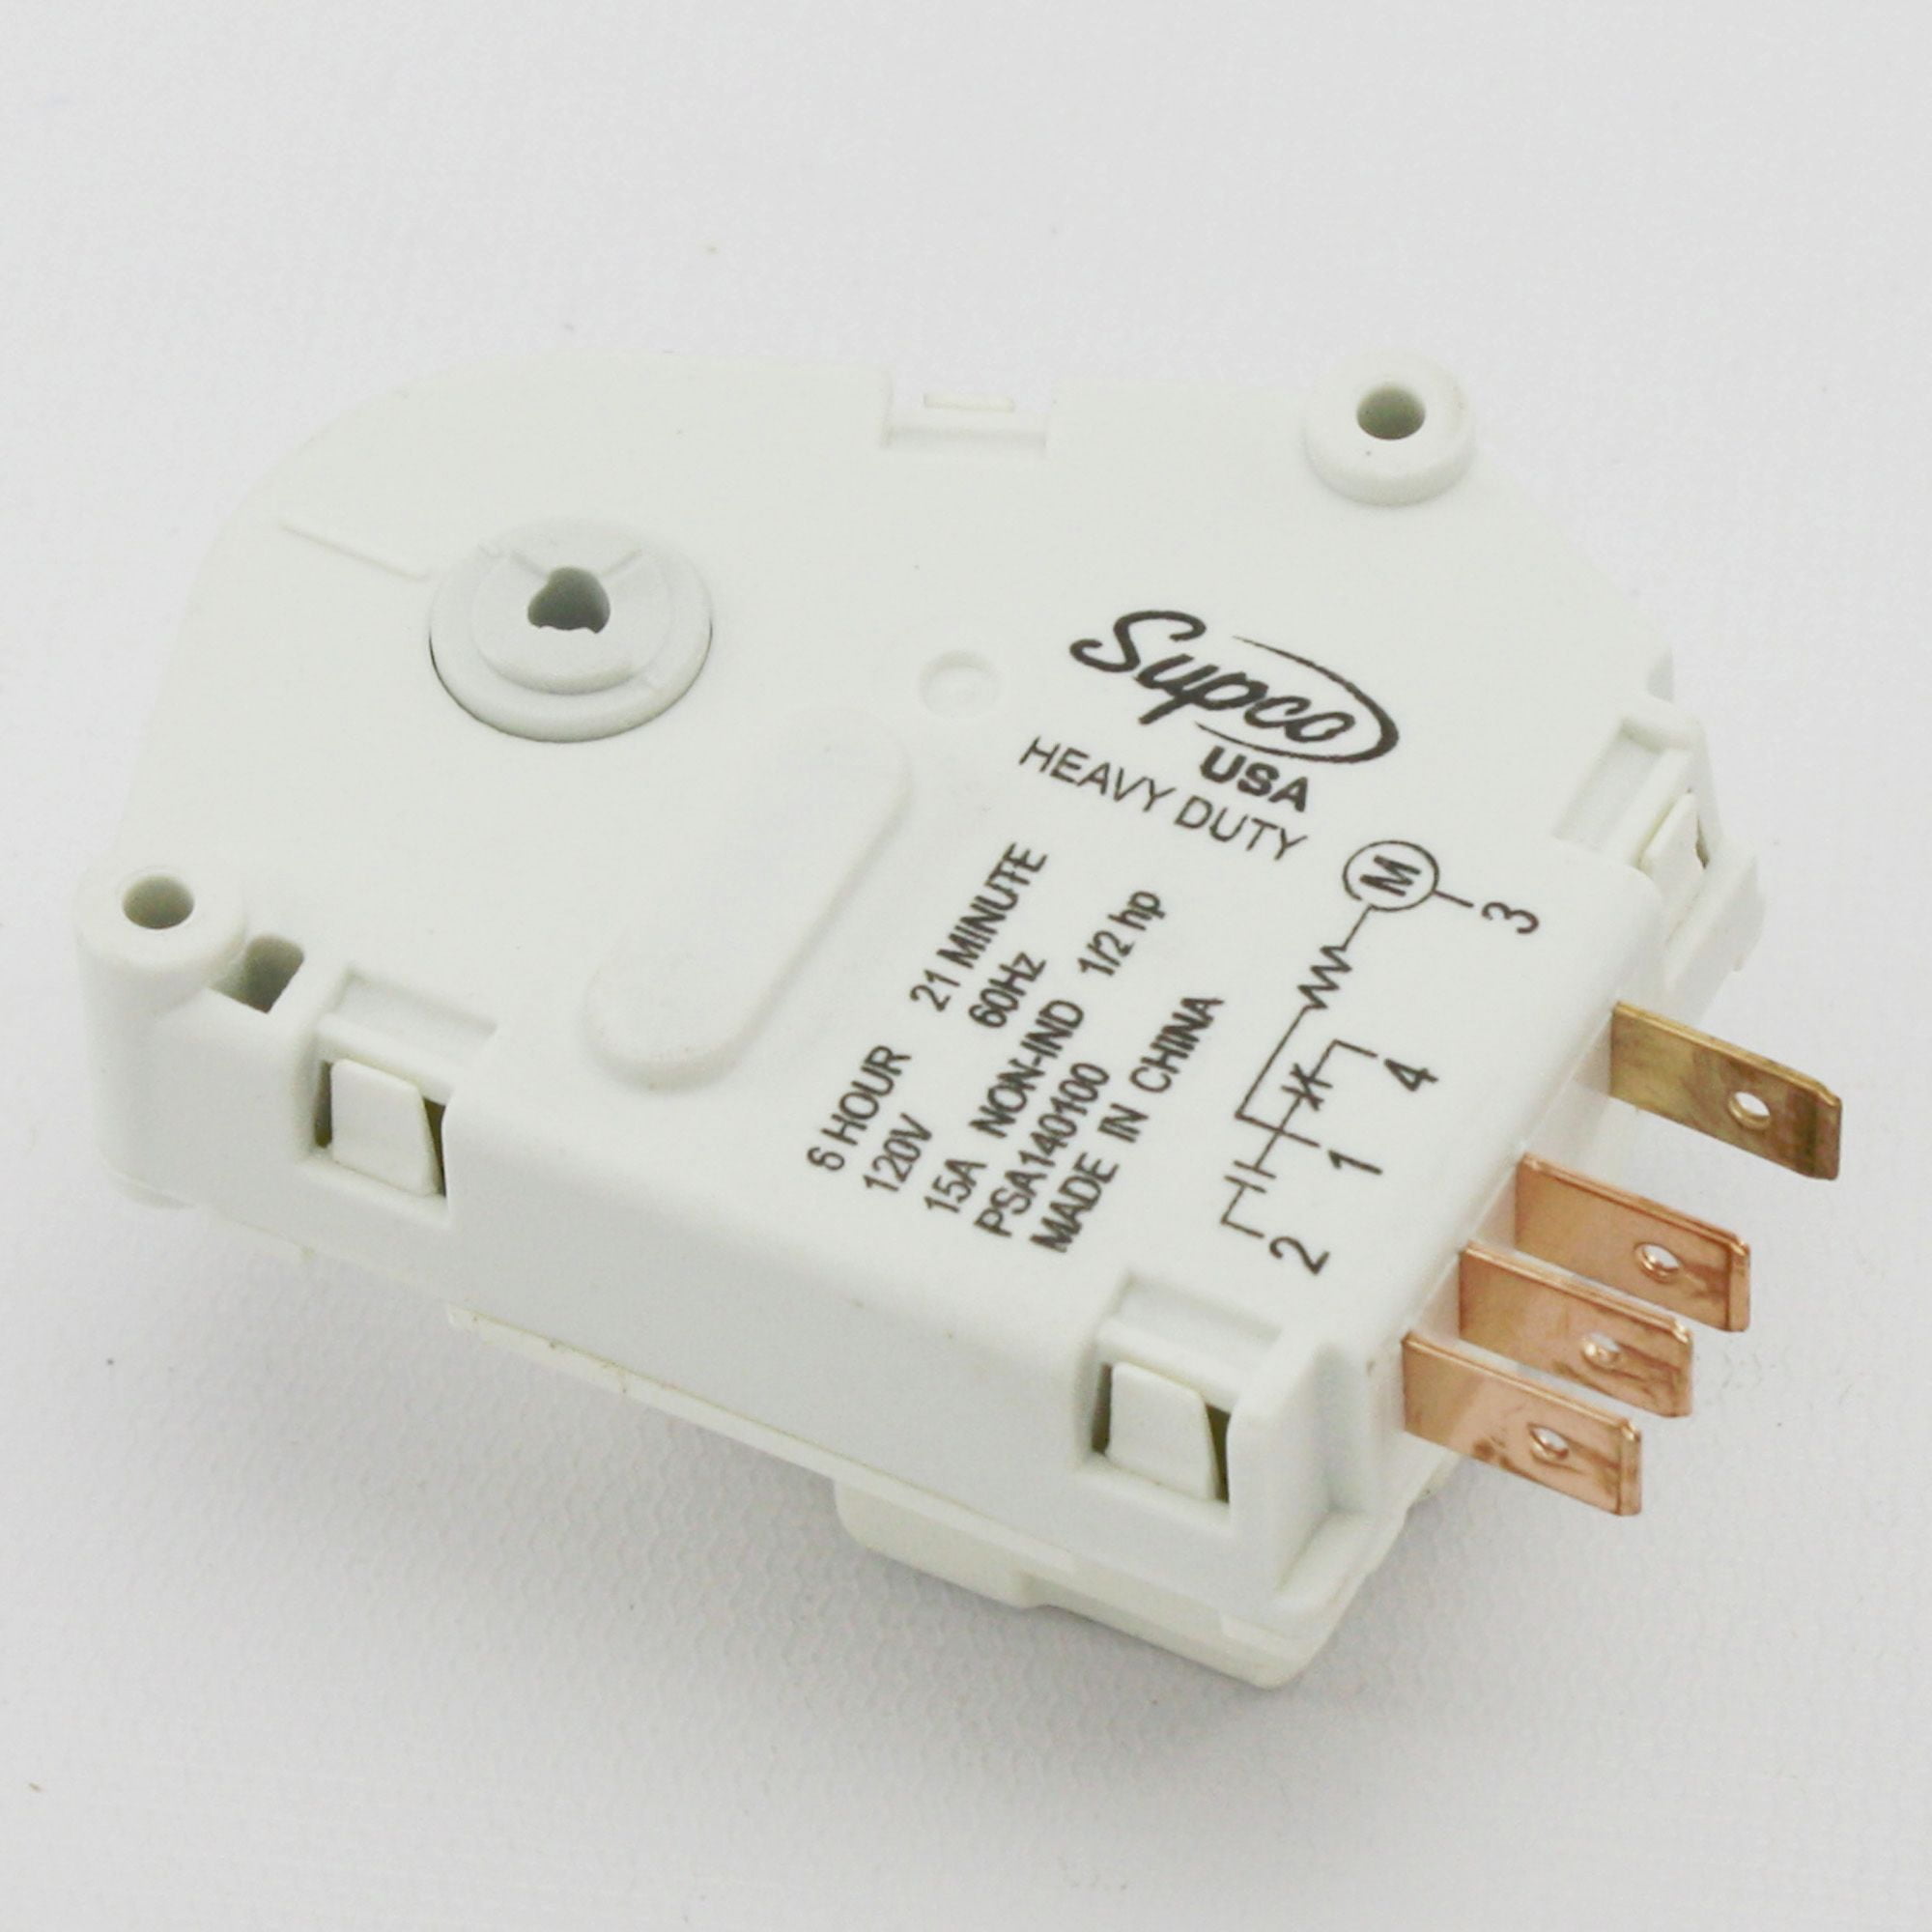 4391974 PS373019 AP3109443 Refrigerator Defrost Timer for Maytag Magic Chef